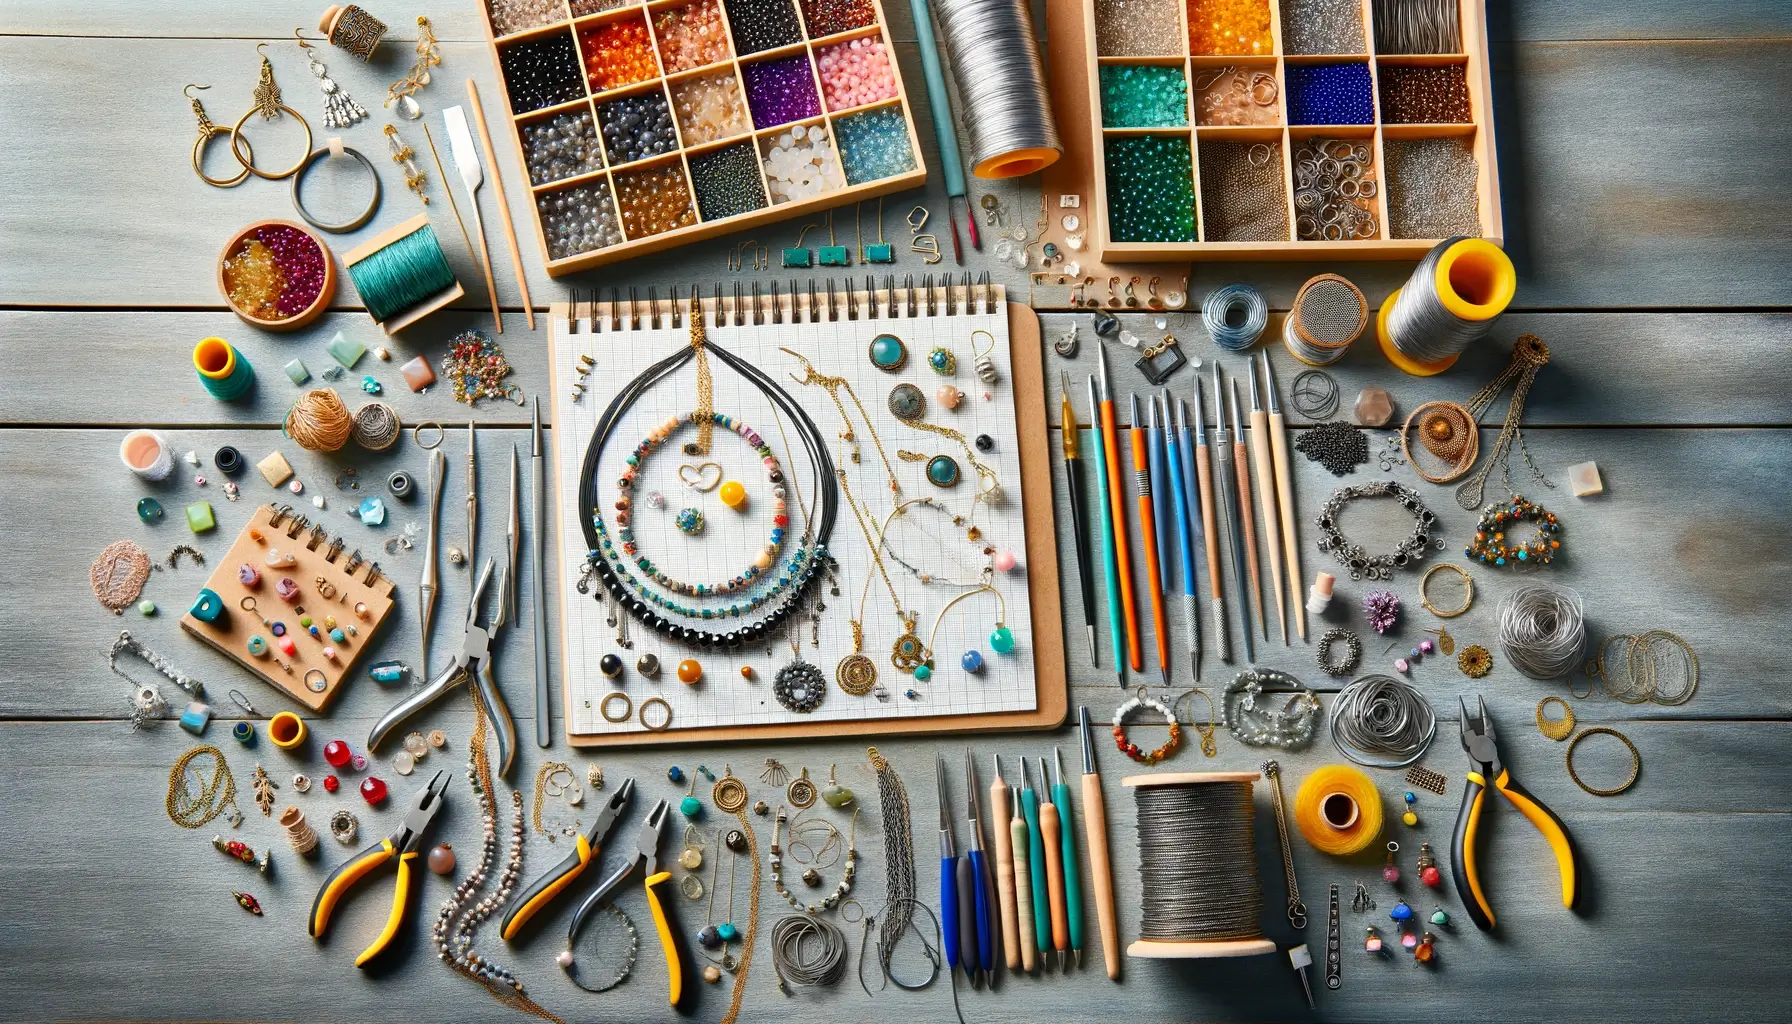 Overhead view of a DIY jewelry-making setup with assorted beads, tools, and handcrafted pieces neatly arranged on a wooden surface, showcasing the variety and creativity involved in jewelry crafting.